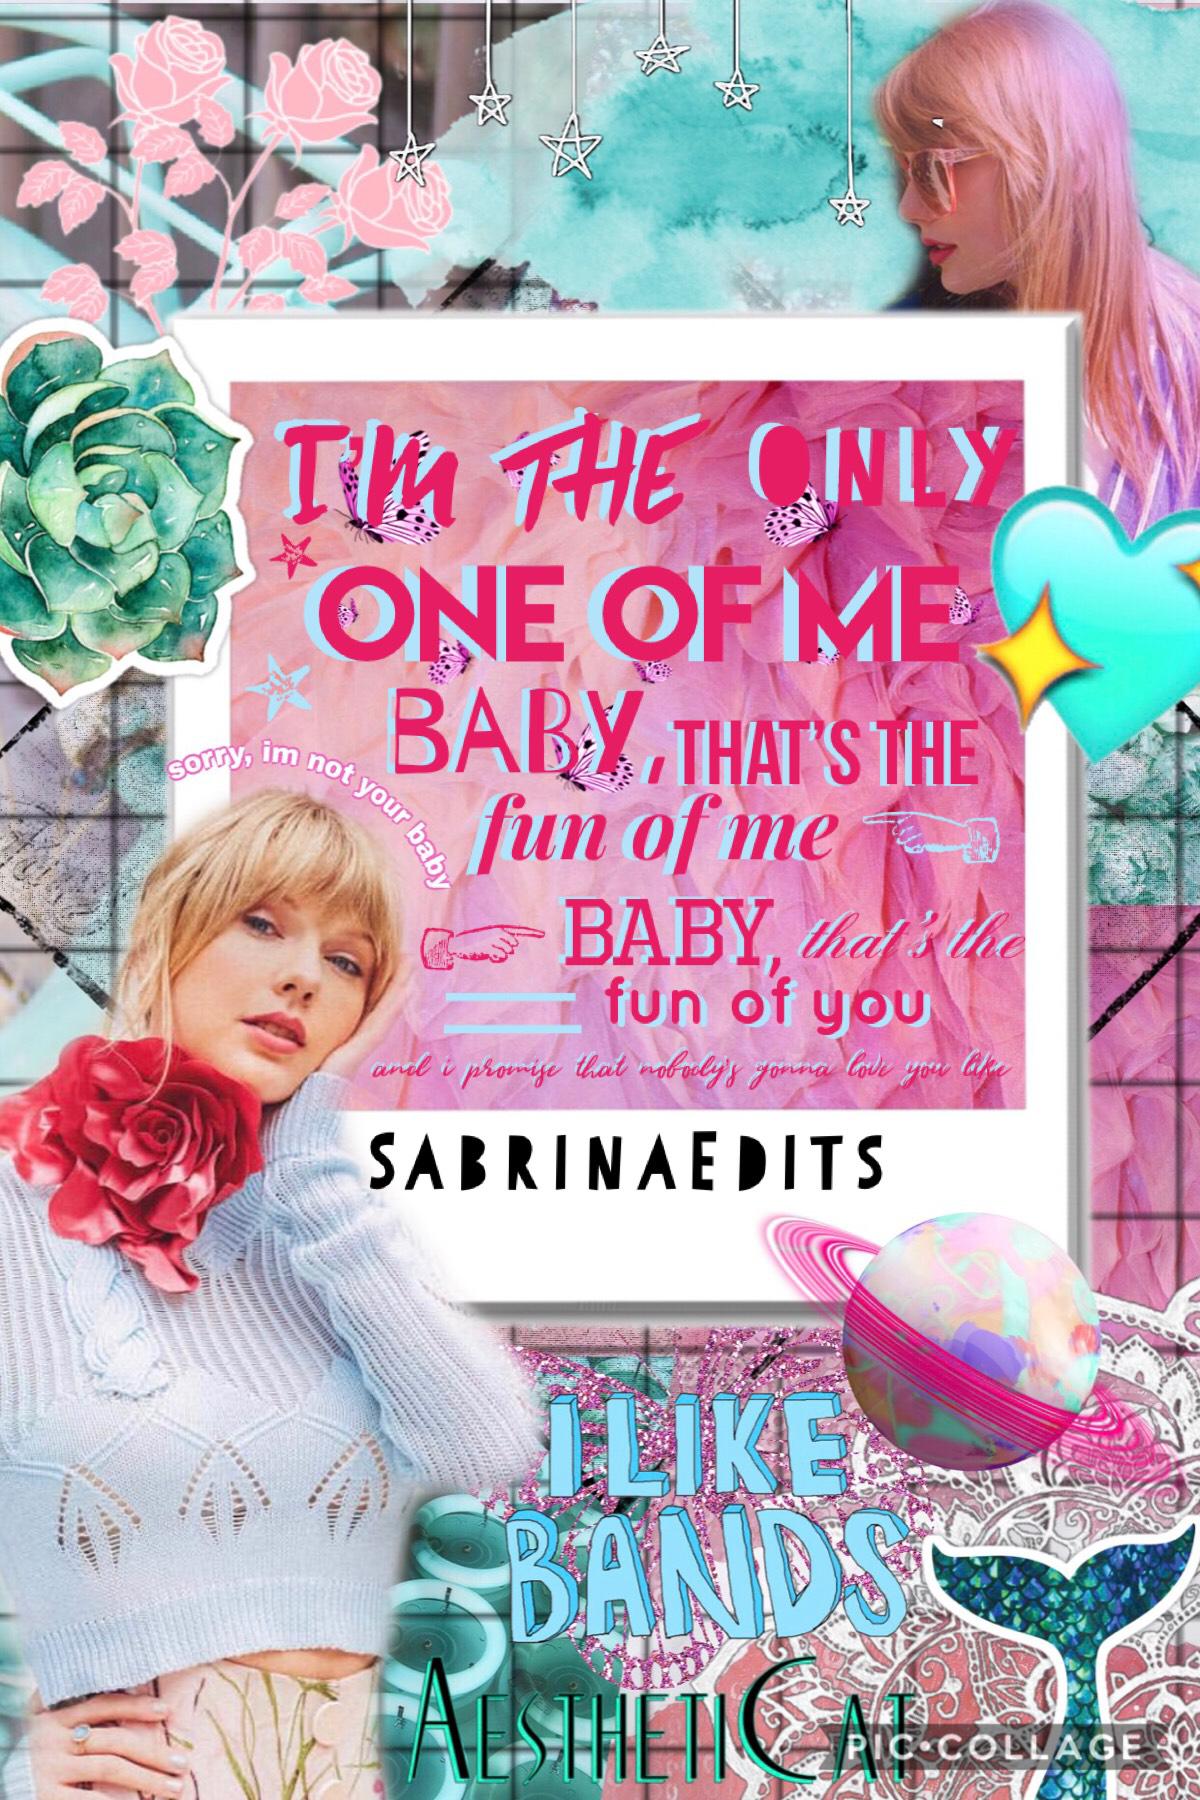 🌈TaP🌈
Who else LOVES this song🎤? I know your’re all so board of Taylor Swift edits, sorry 😐. QOTD: Favorite Taylor Swift song? AOTD: Wildest Dreams, I don’t want to live forever, Fifteen, Our Song, Style, and i have like 20 more 😂😂😂